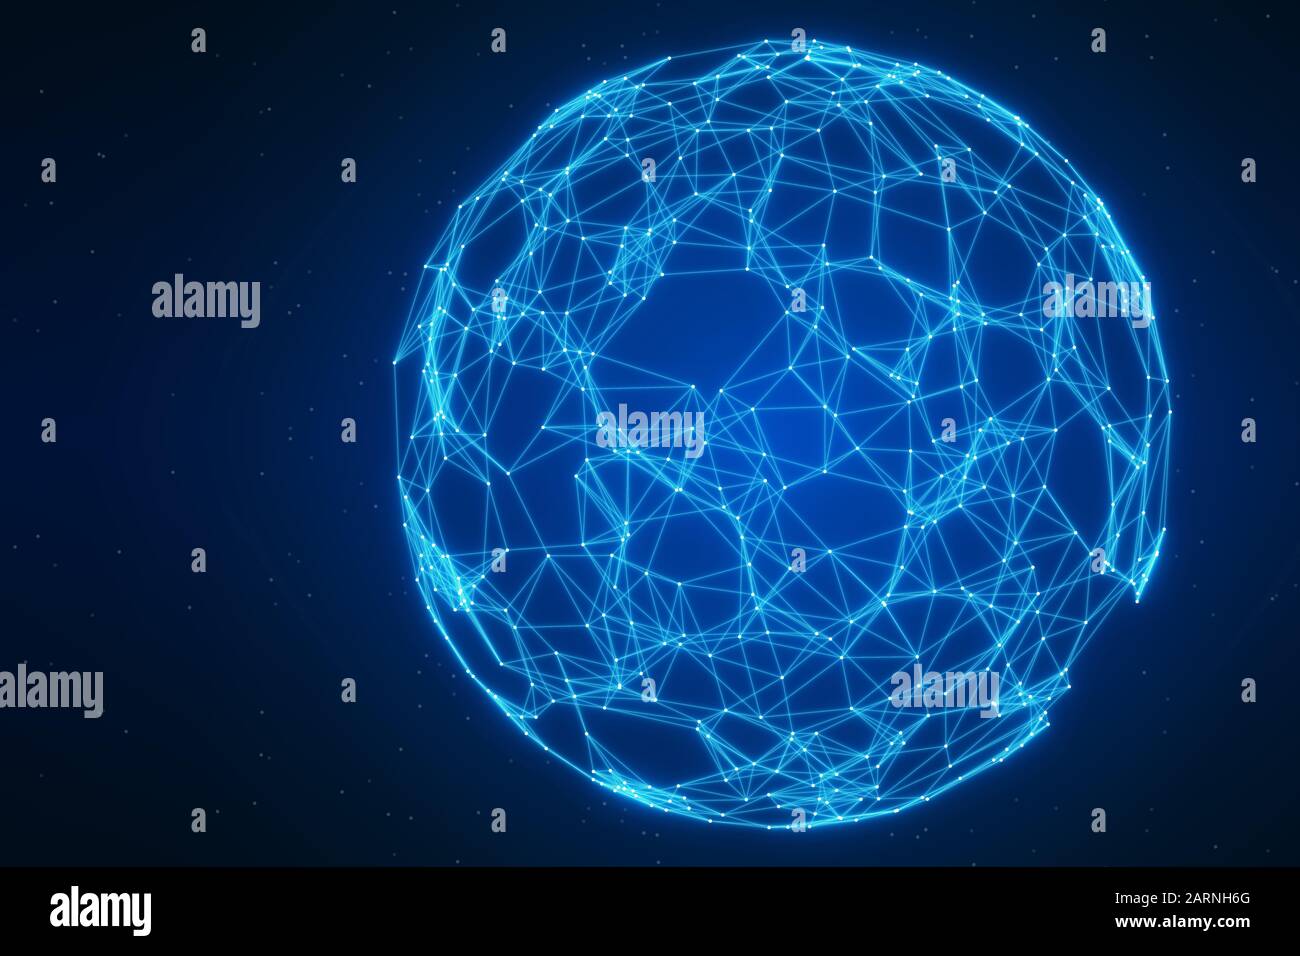 Abstract global network technology illustration for business, telecommunications, Internet of Things (IoT), big data, fintech or Artificial Intelligen Stock Photo